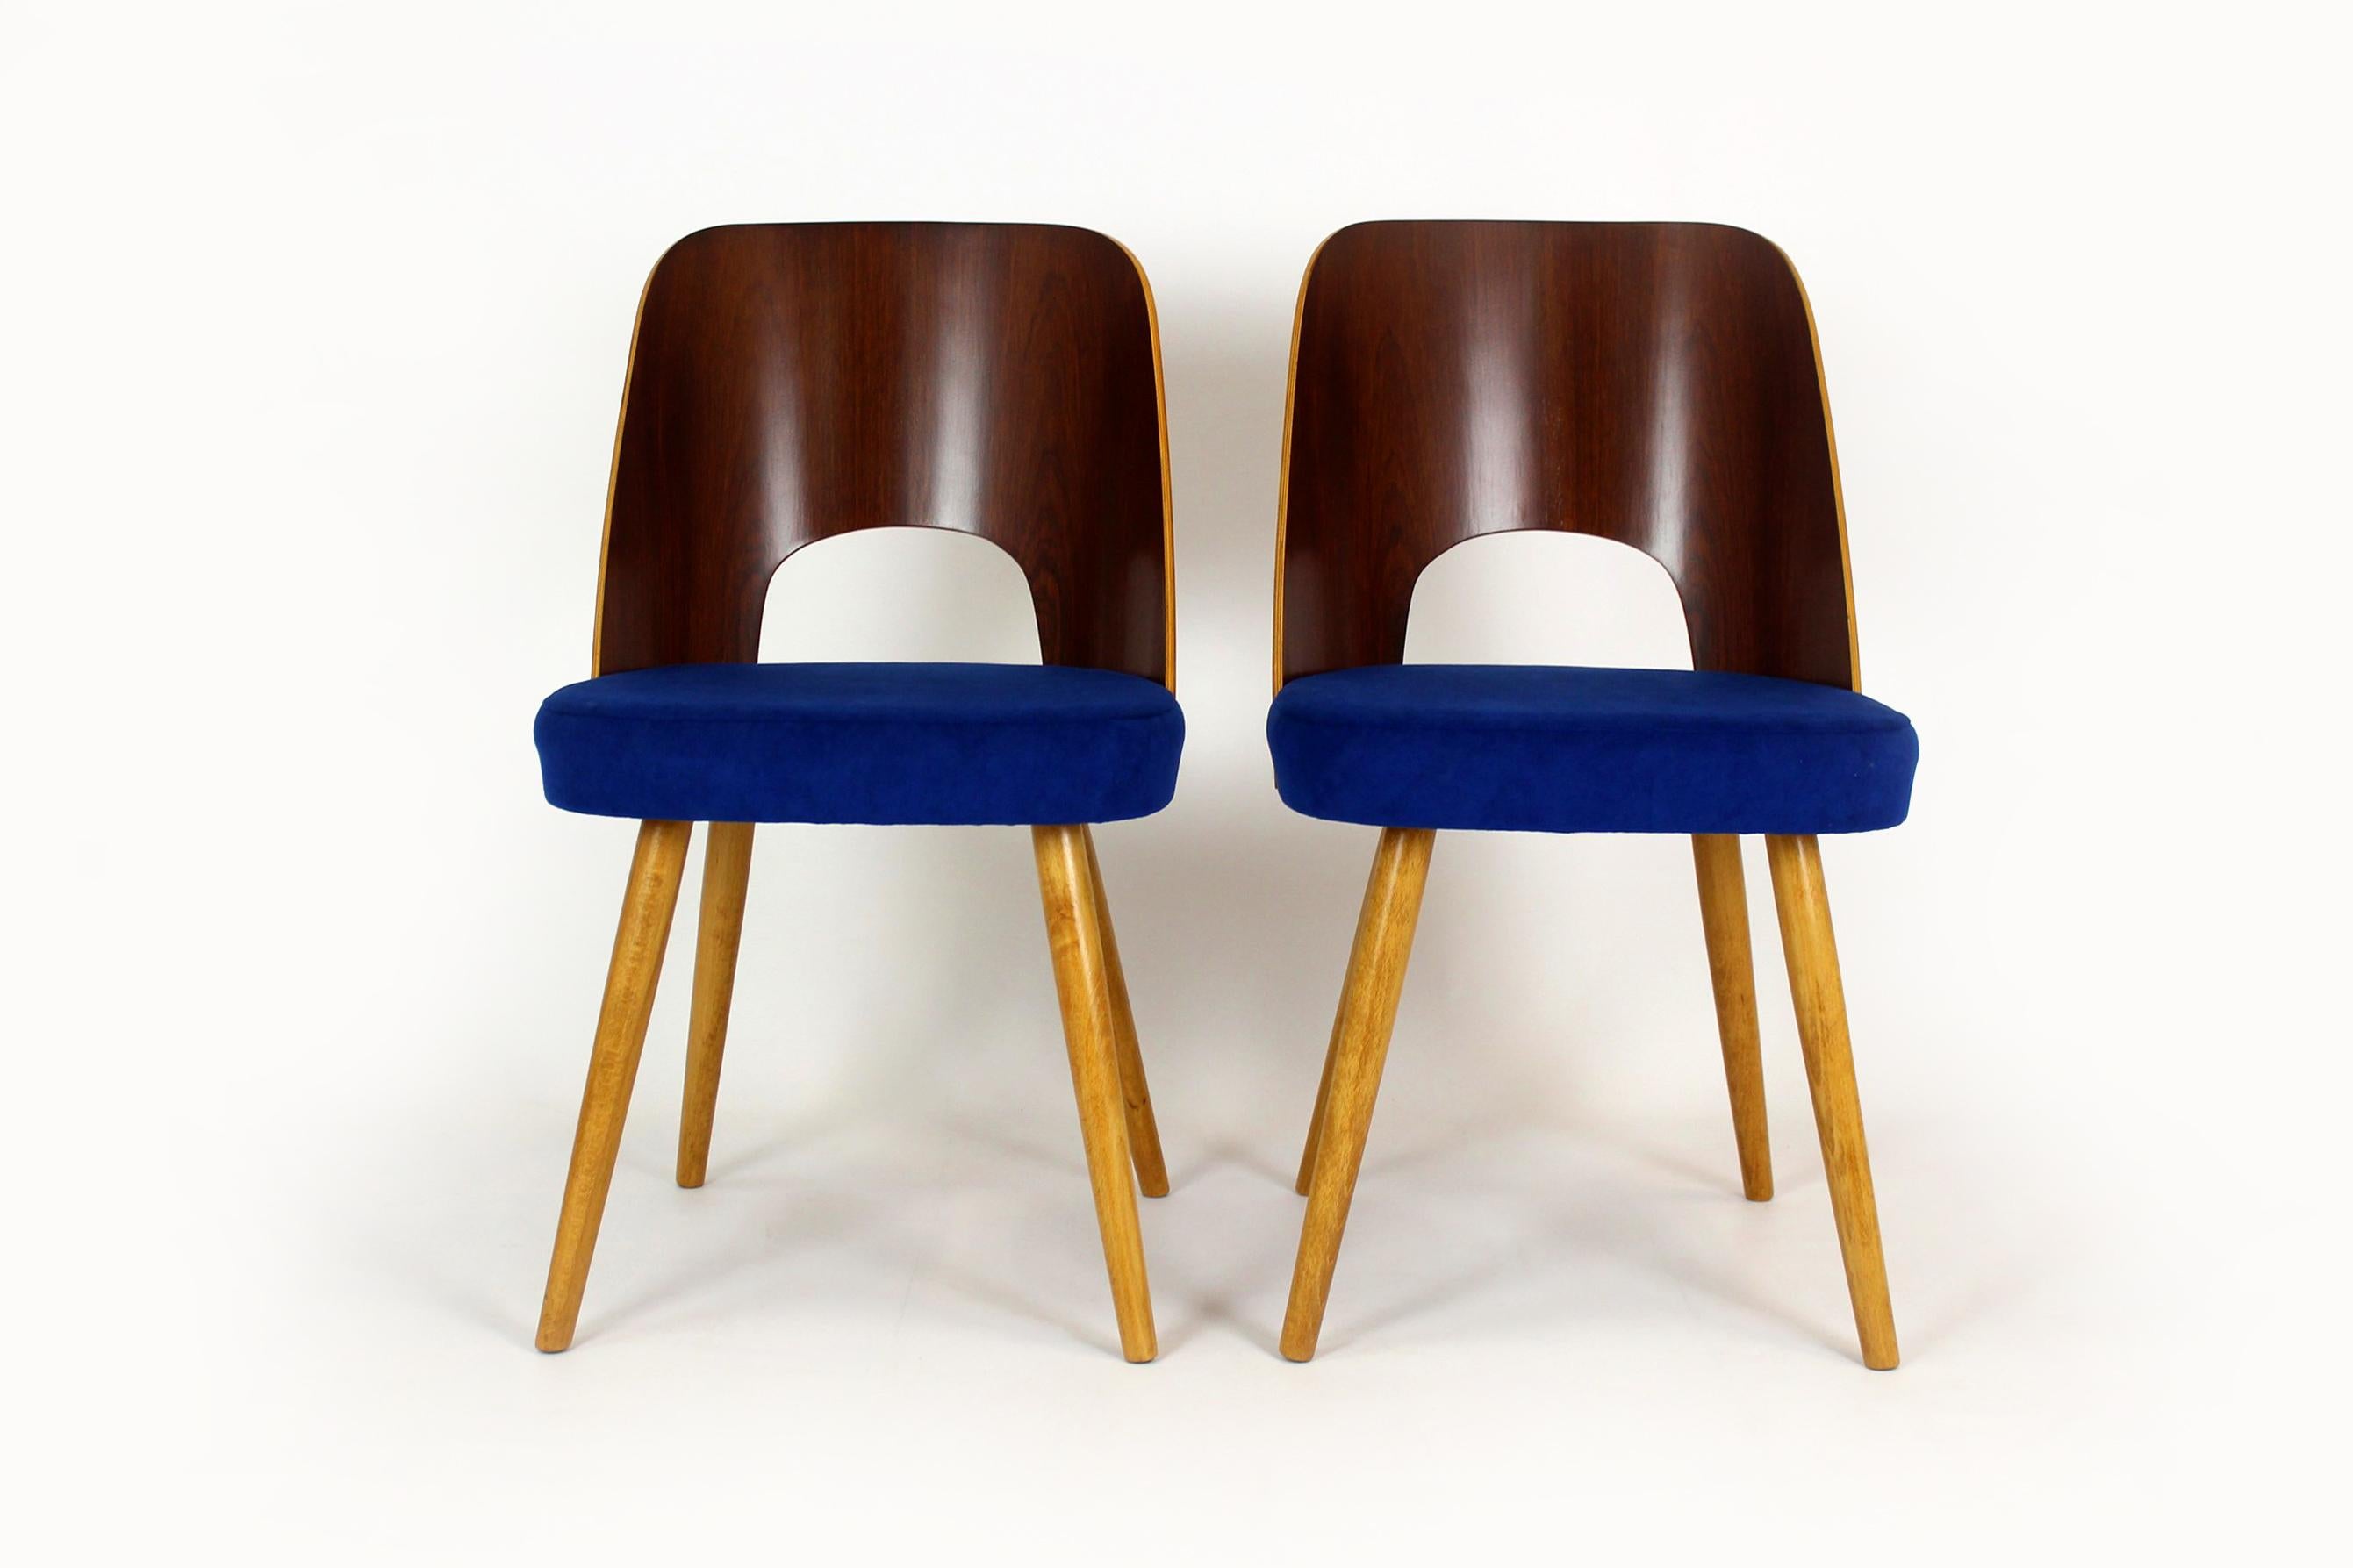 
Set of two chairs from Tatra designed by Oswald Haerdtl and produced in the 1960s in former Czechoslovakia. Chairs have been restored, new seat foams, upholstered in new fabric.
